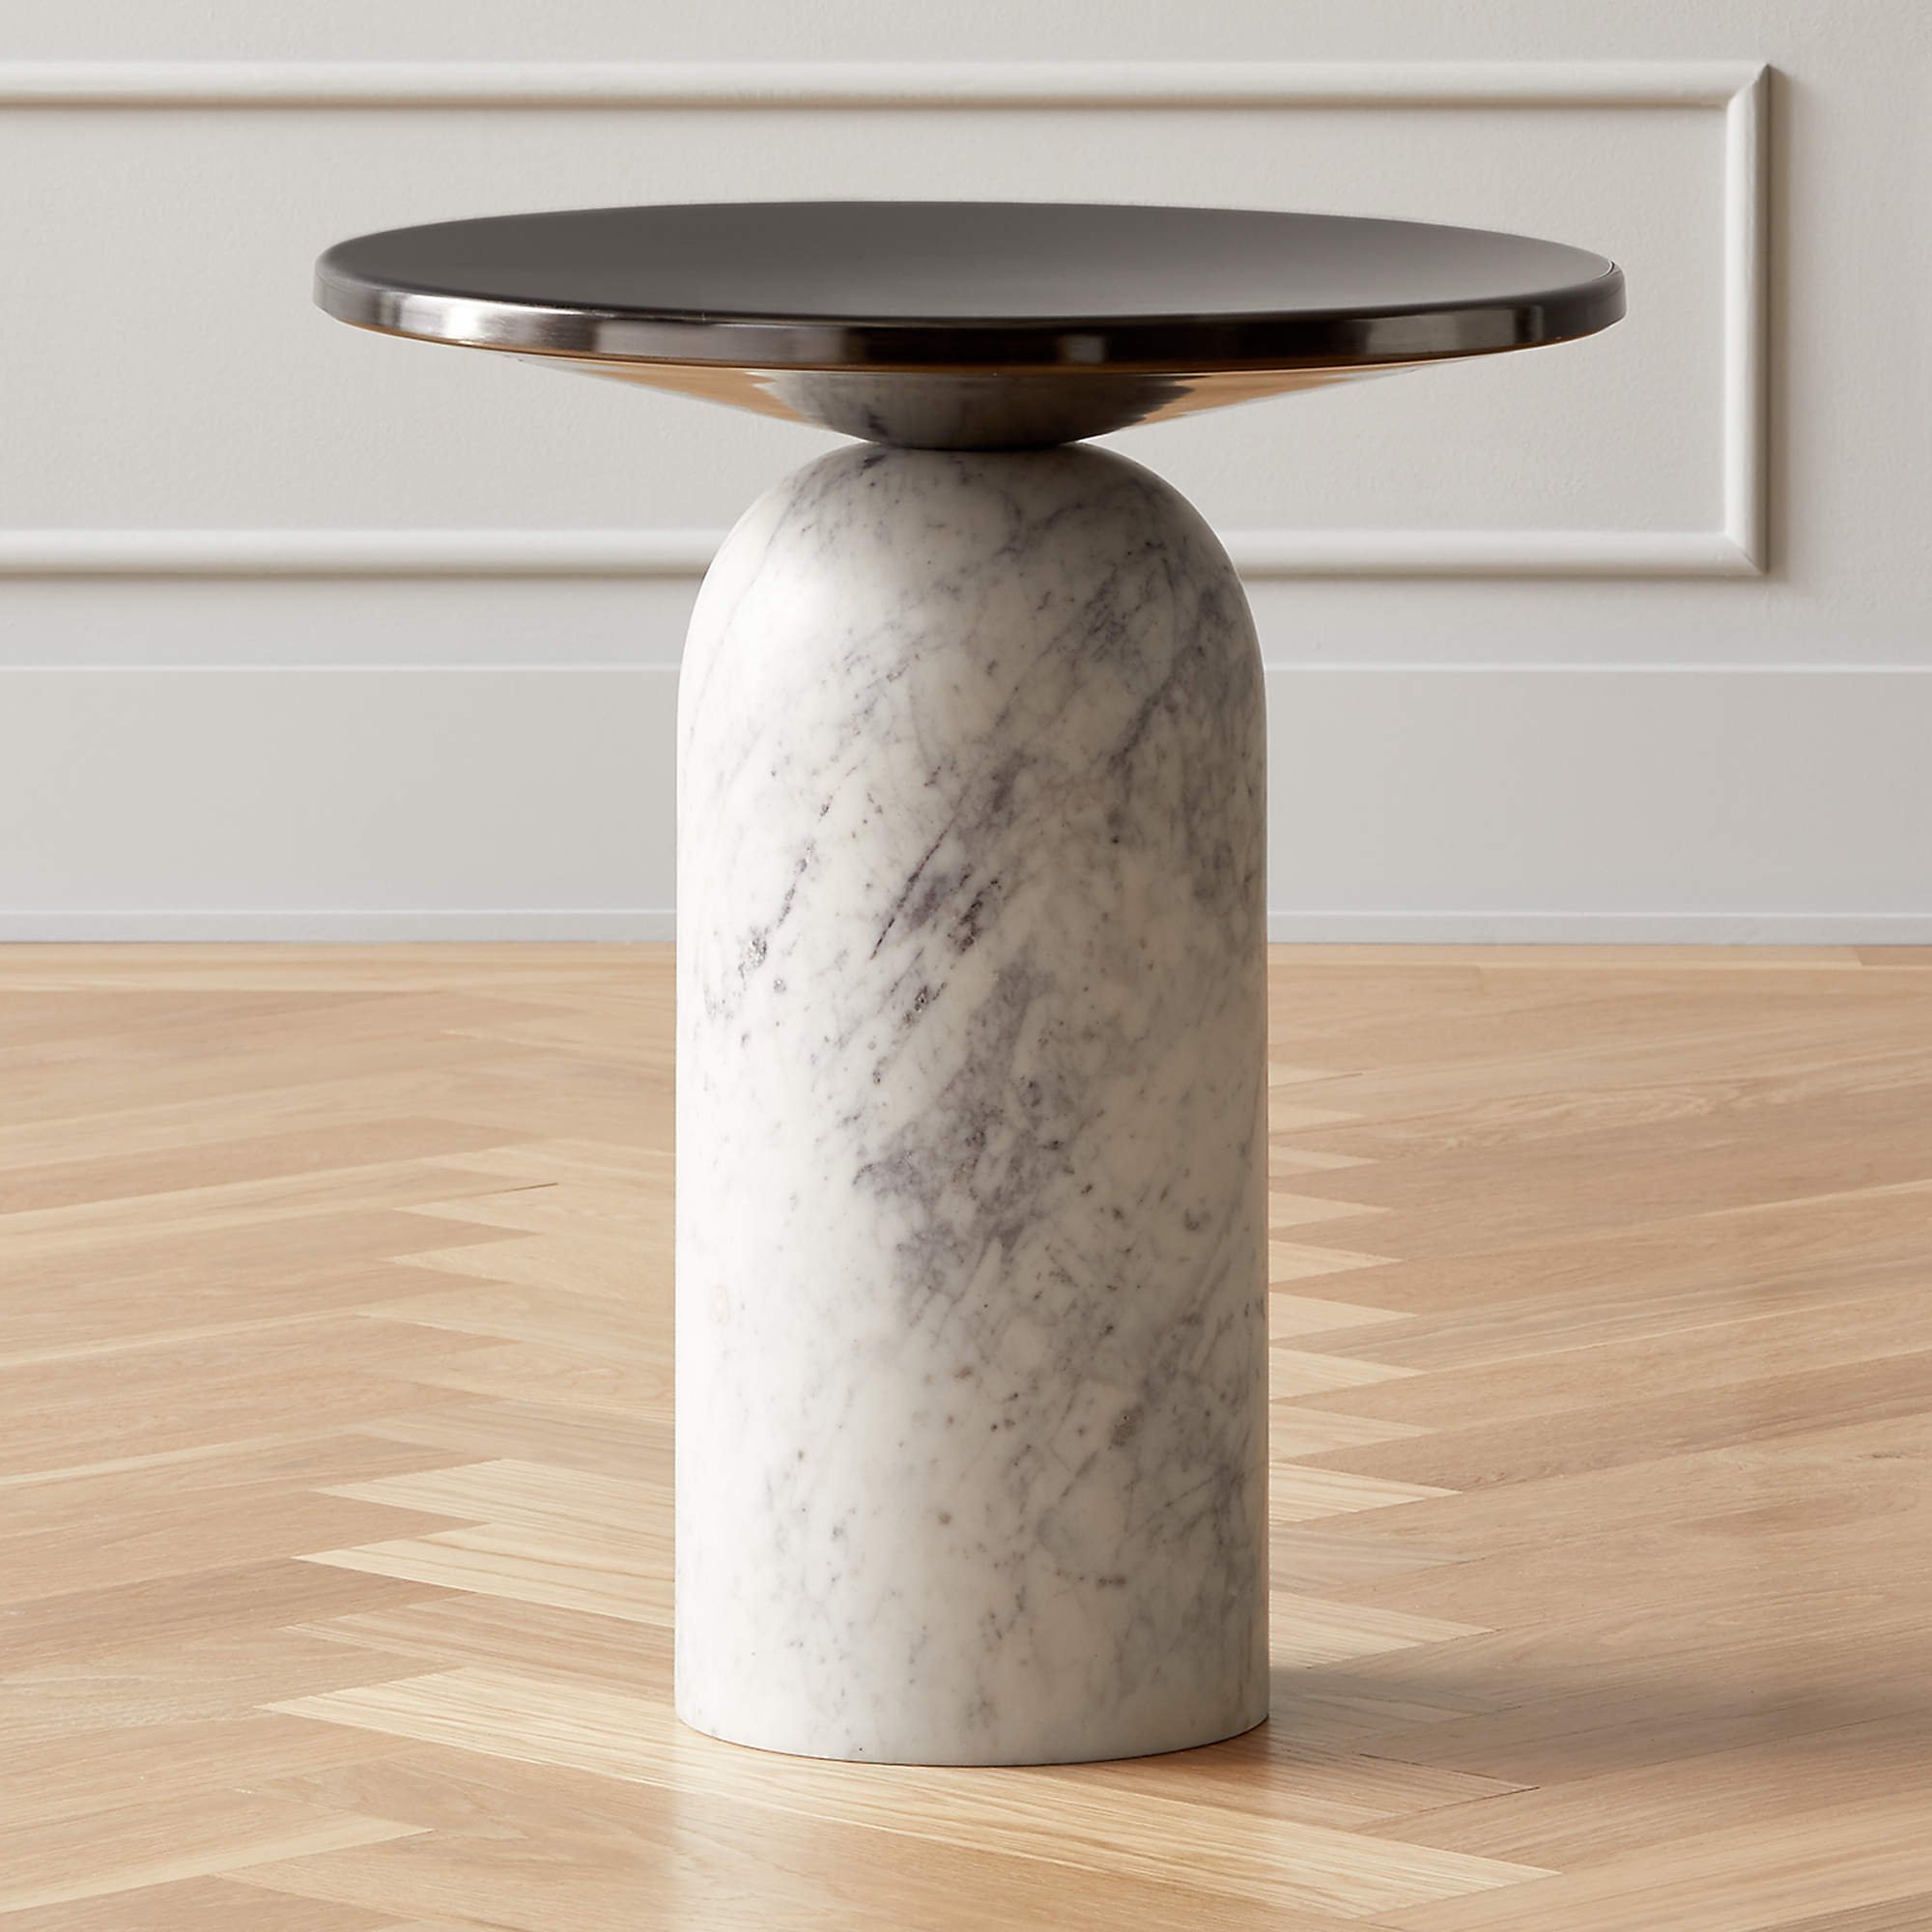 martini-side-table-with-white-marble-base.jpg